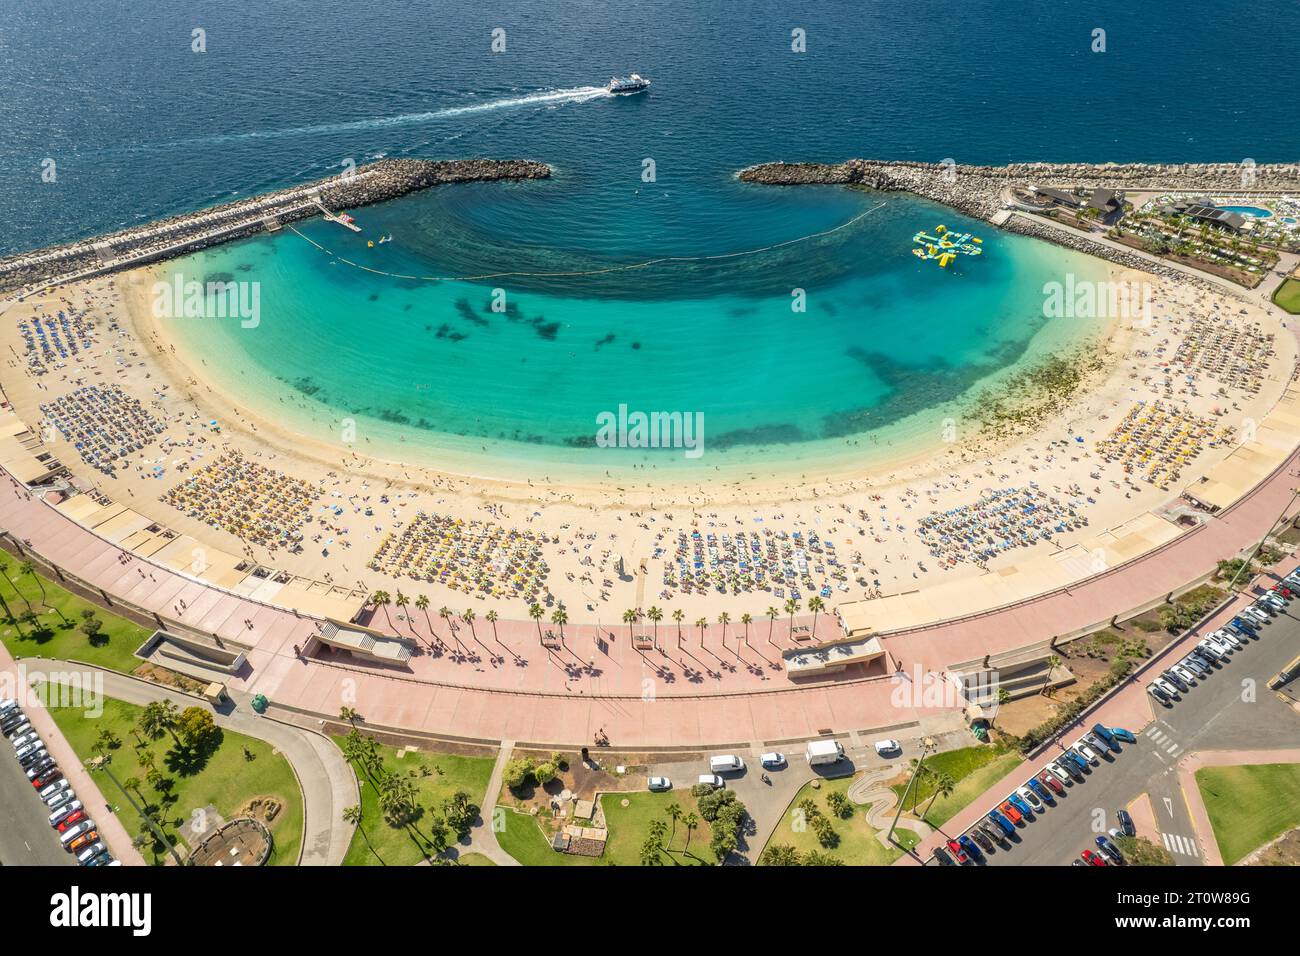 Aerial view of the Playa de Amadores beach, Gran Canaria, Canary Islands, Spain Stock Photo